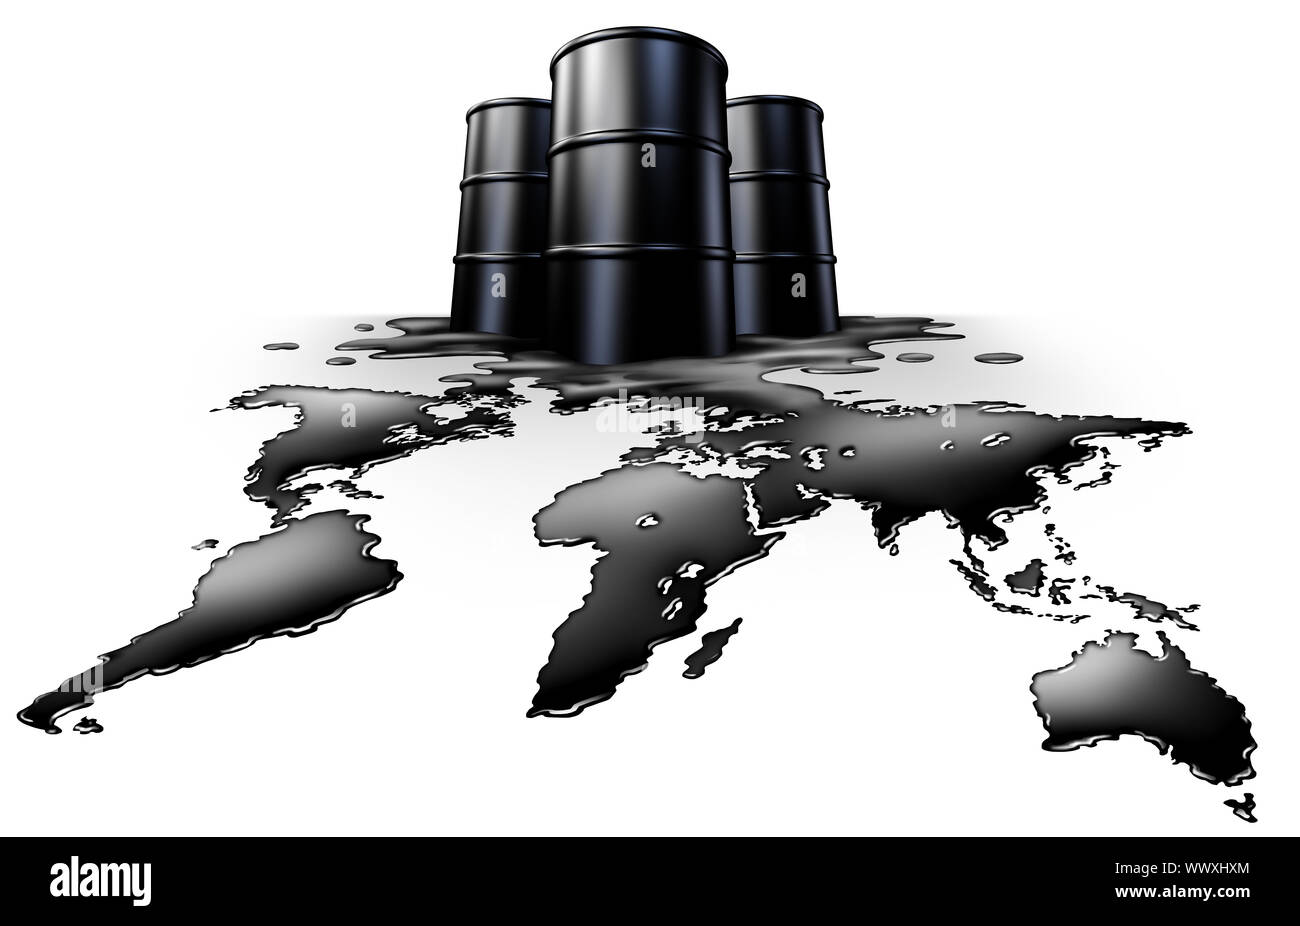 World oil crisis energy concept and petroleum exports symbol as a global fossil fuel supply icon as a spill shaped as the planet. Stock Photo